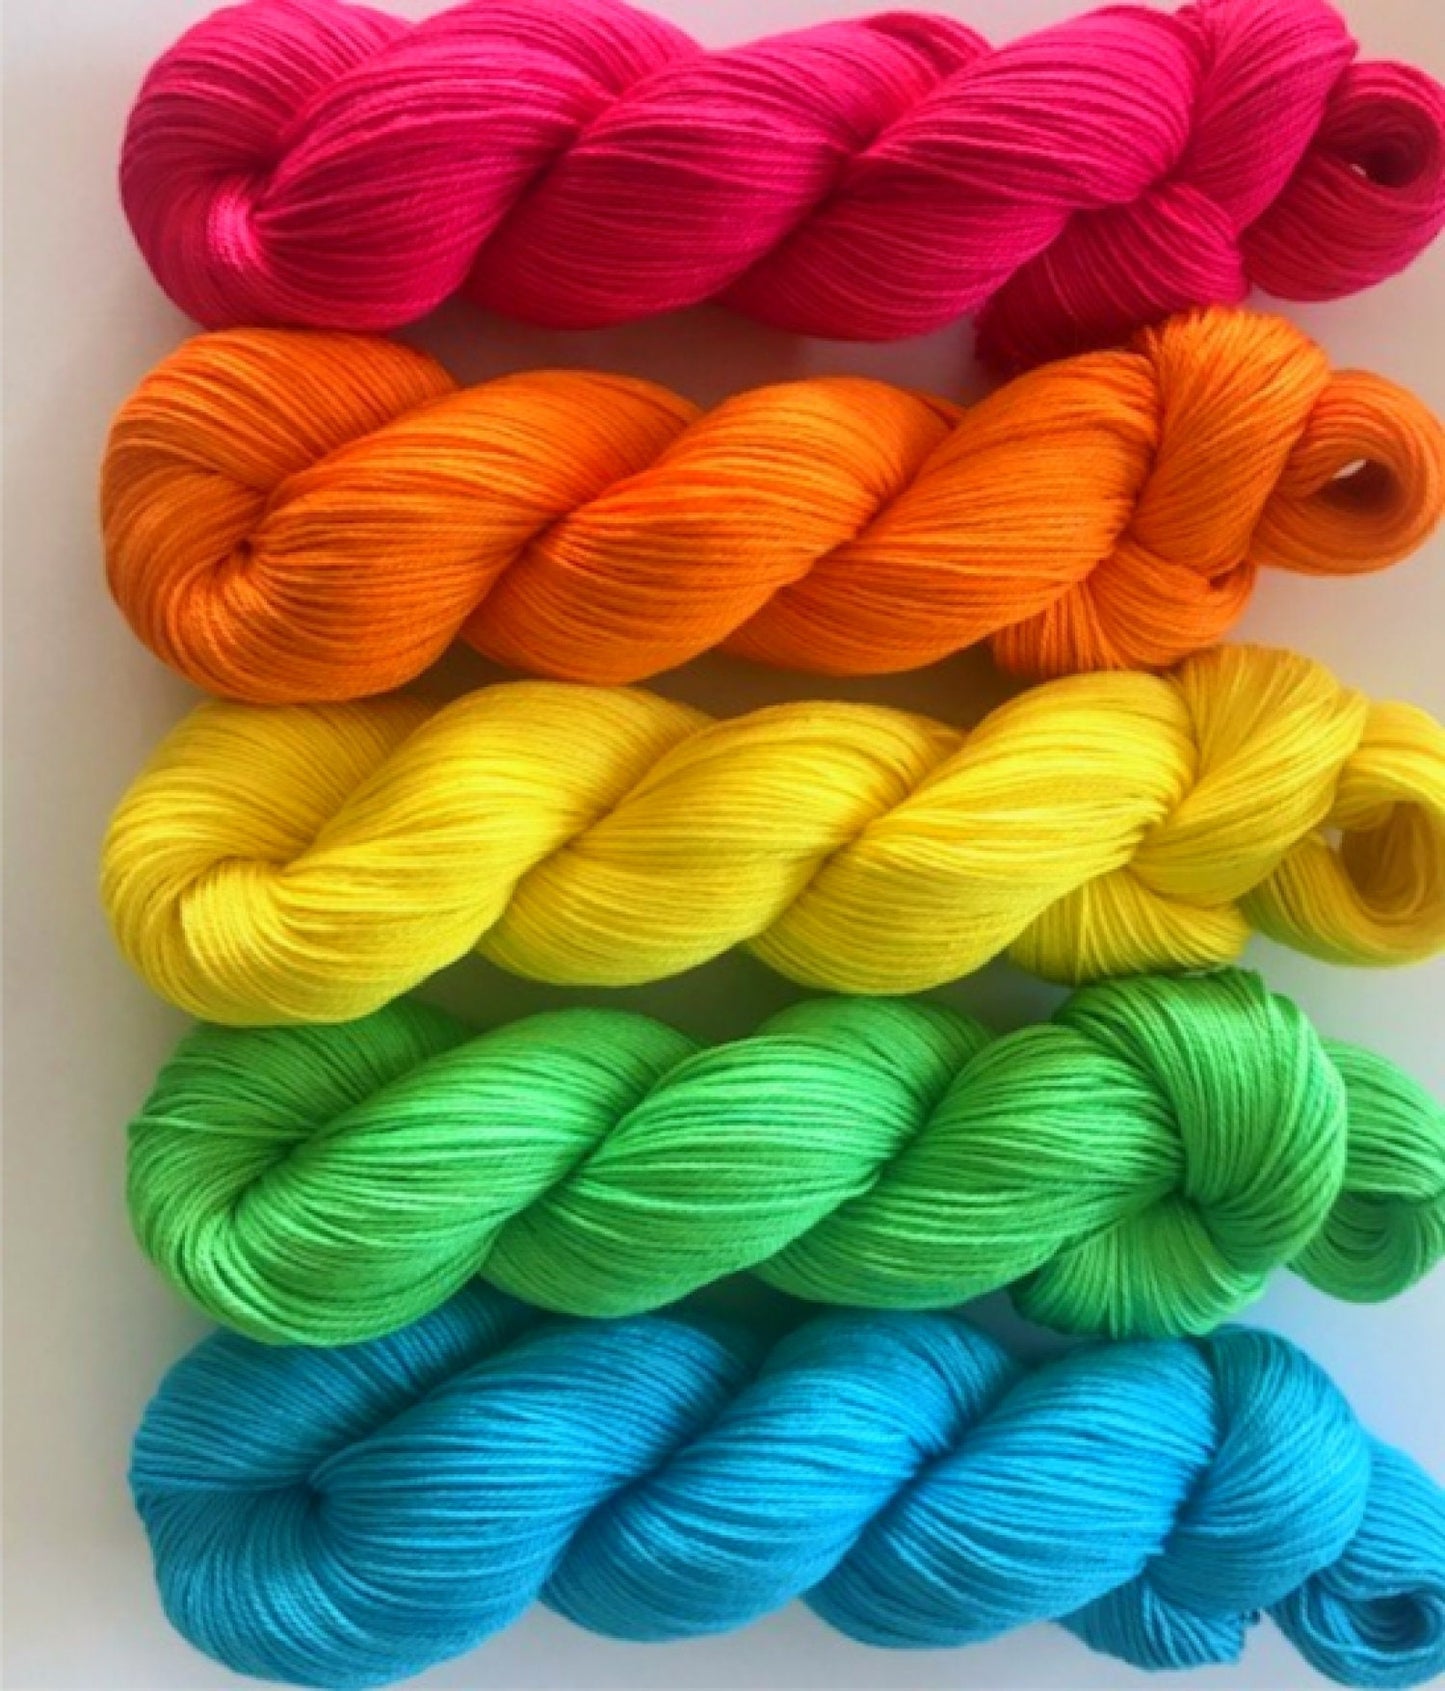 Hand Dyed Vegan Yarn Kits - Fingering / Sock Weight Bamboo Cotton Base - Choose Your Colors - 320 Yds/Hank - 1600 Yds/Kit - Indie Dyed Fiber